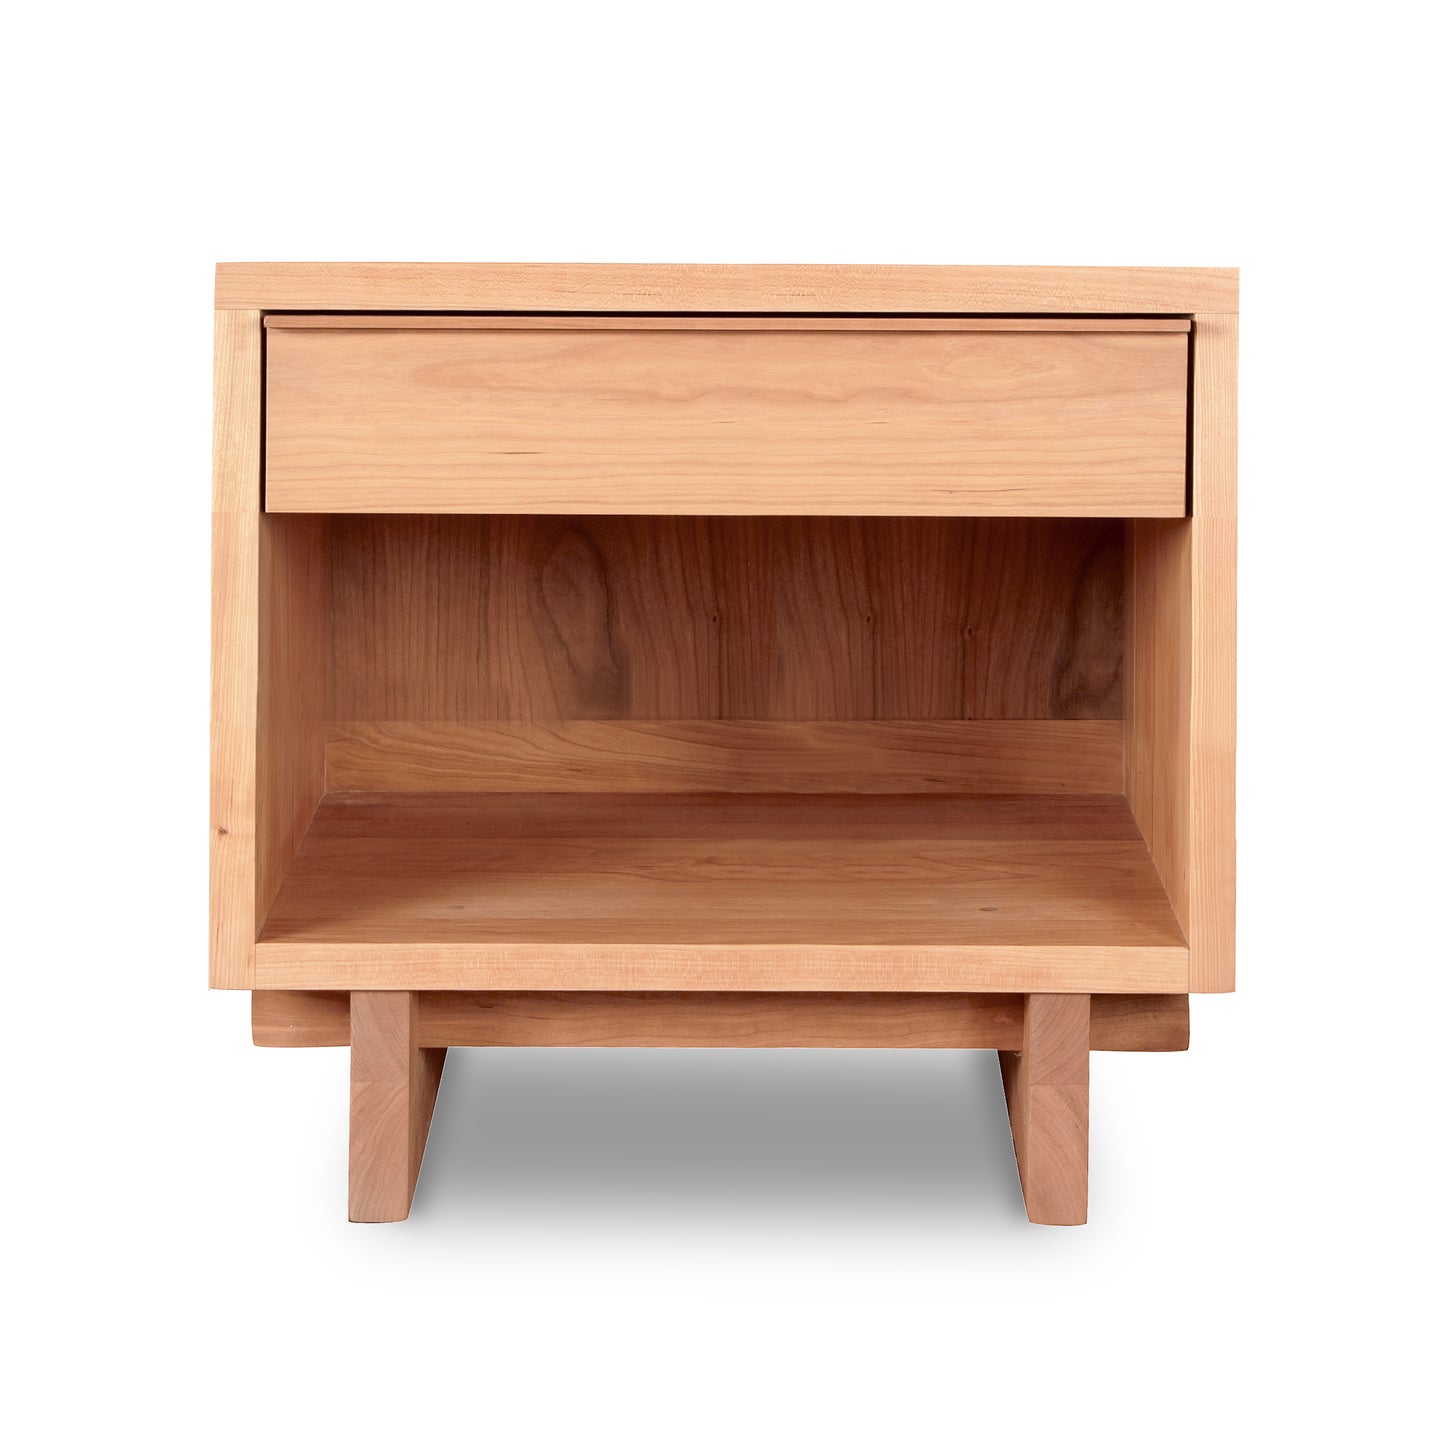 A Vermont Furniture Designs Kipling 1-Drawer Enclosed Shelf Wide Nightstand in natural wood, with an open drawer and empty shelf, isolated on a white background.